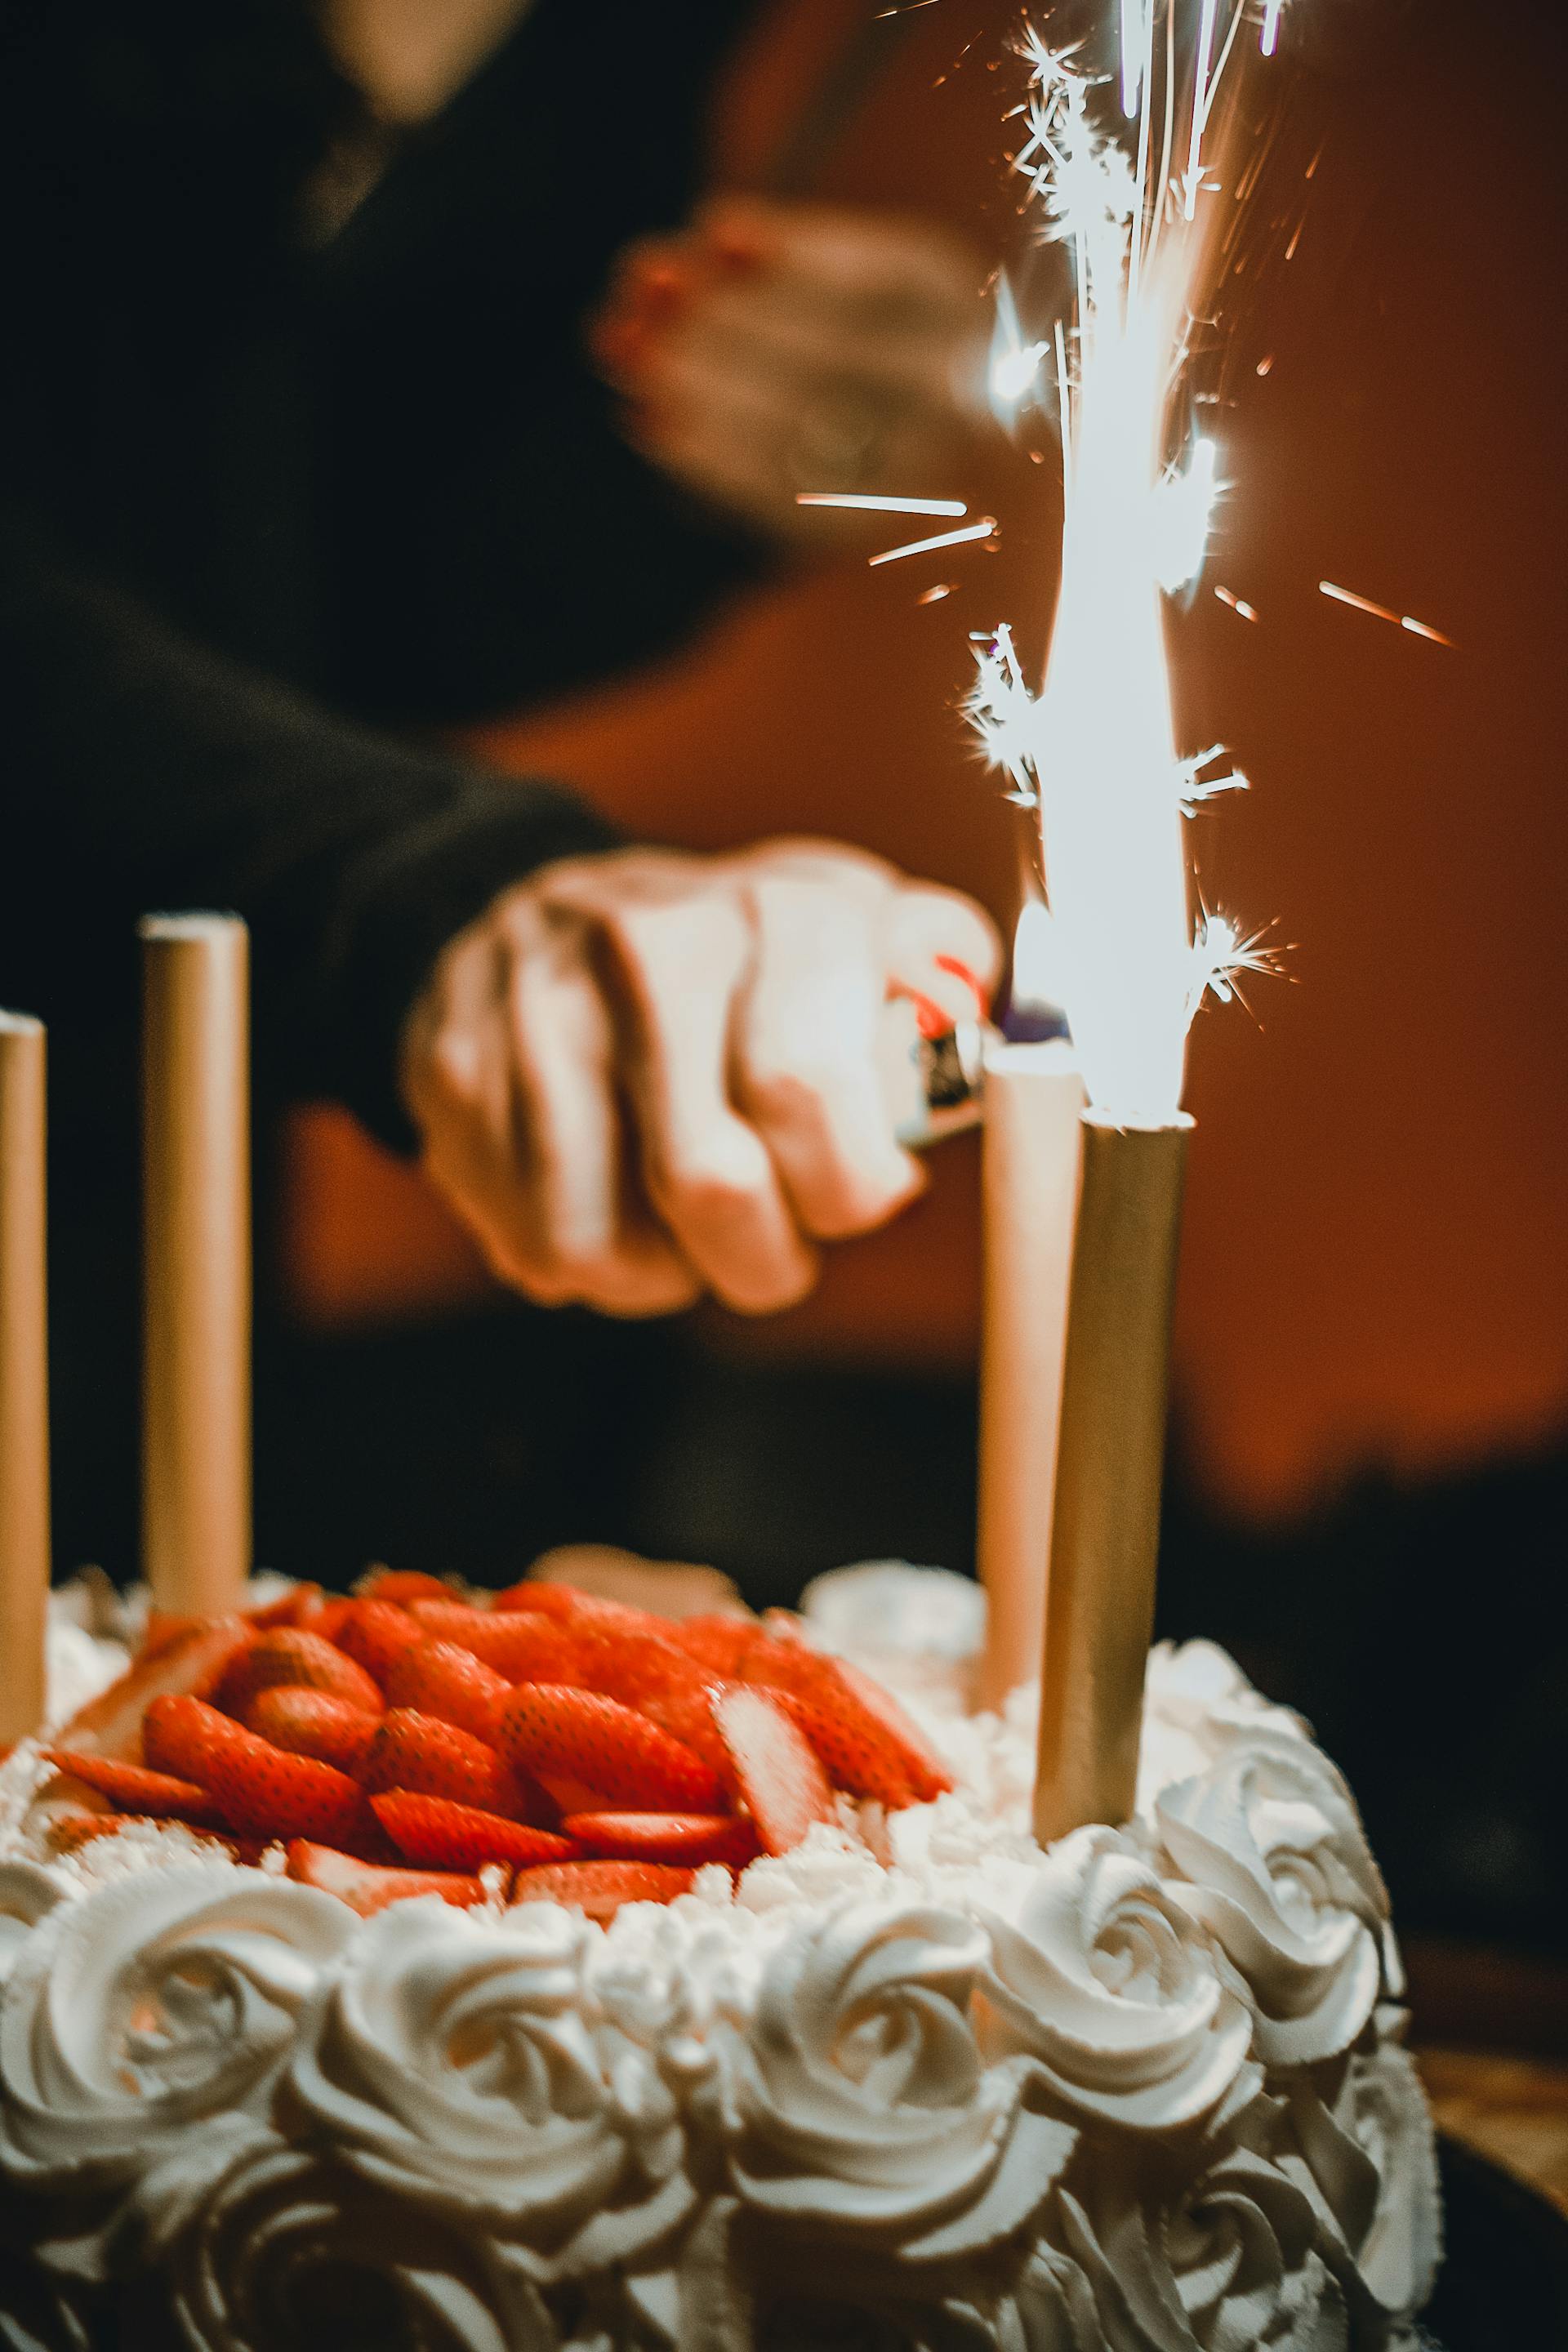 A person lighting the sparklers on a cake | Source: Pexels